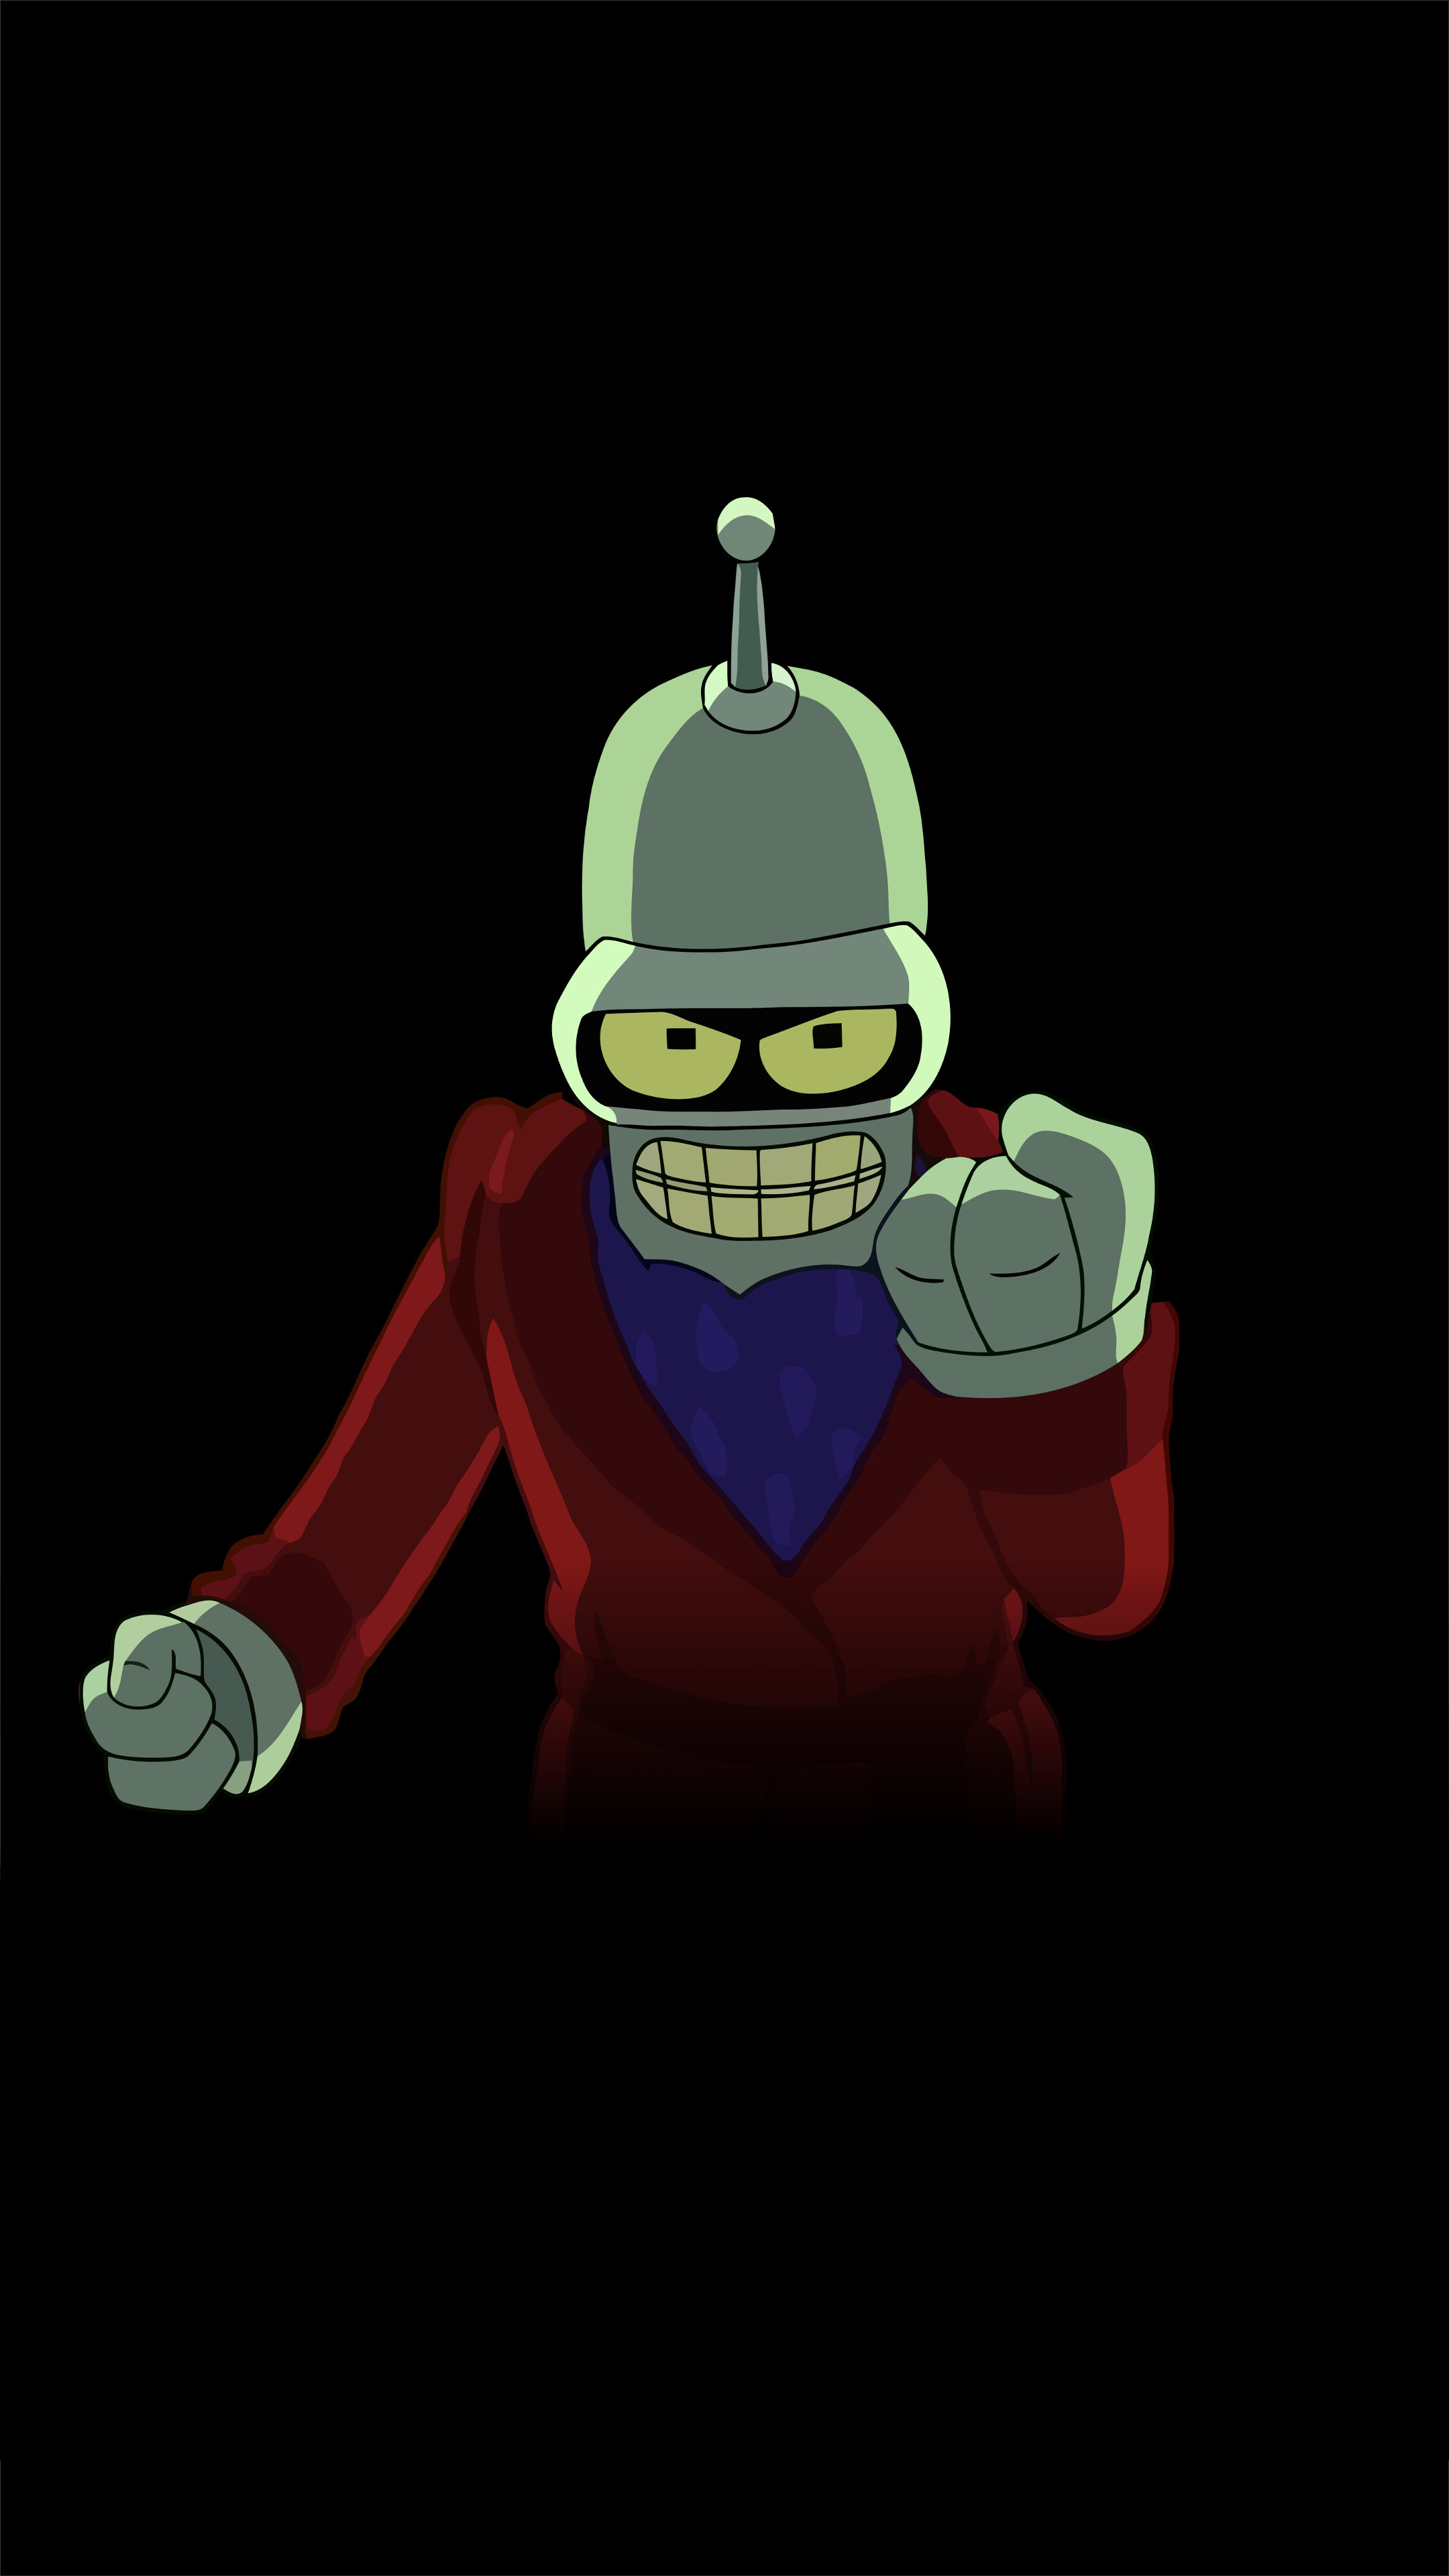 Futurama: Bender Rodriguez, Robot manufactured by Mom's Friendly Robot Company. 2160x3840 4K Background.